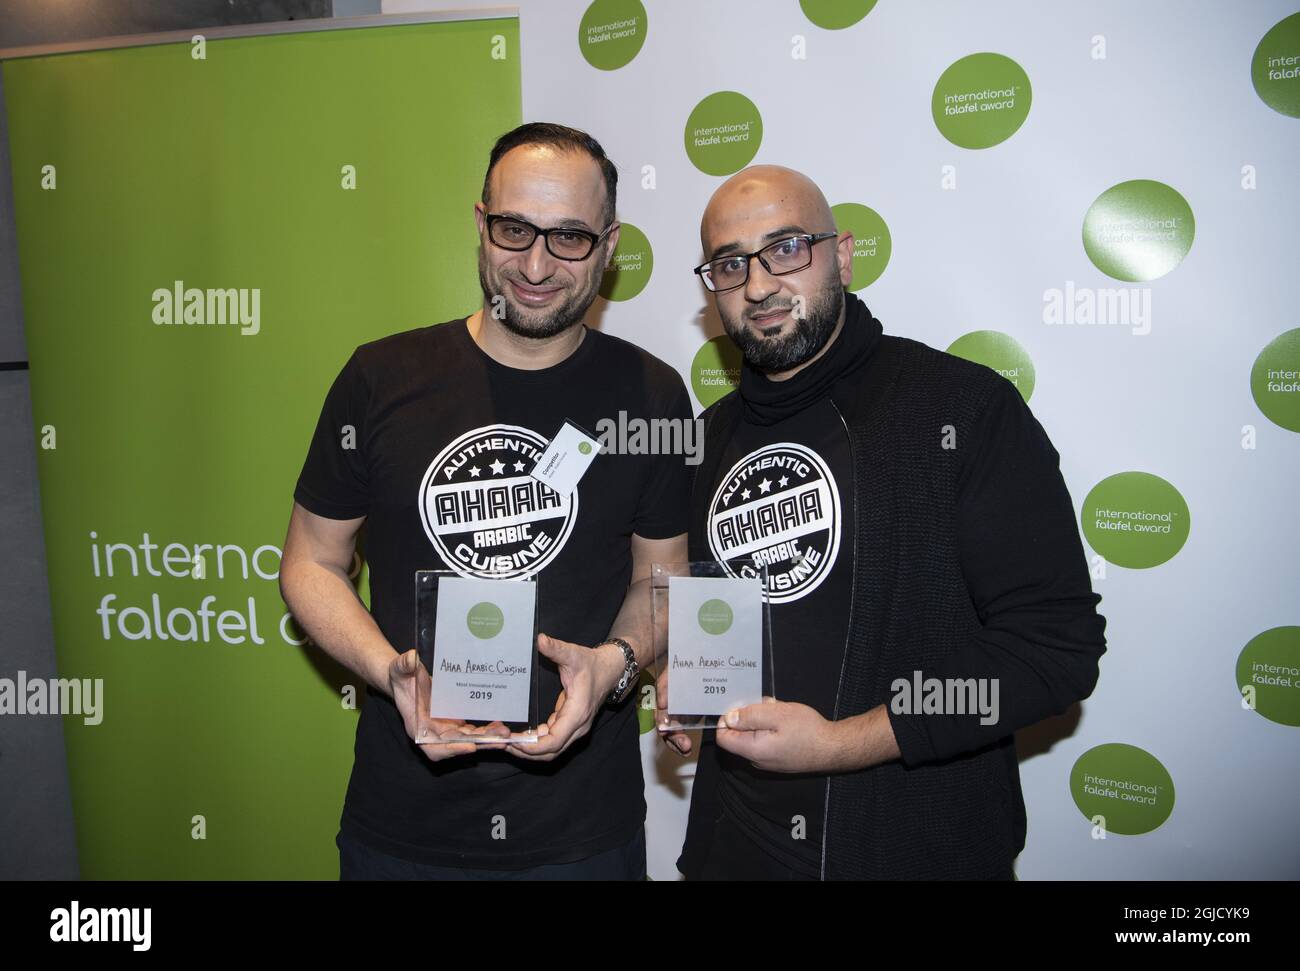 The world's best falafel is still Danish. Ali Abdullah and Hazim El-Yahya at Danish Ahaaa Arabic Cuisine won the Best Falafel and Most Innovative Falafel categories. Fifteen teams from six countries competed at the International Falafel Award 2019 in Malmoe, Sweden on Saturday December 14, 2019. Photo: Johan Nilsson / TT / code 50090 Stock Photo